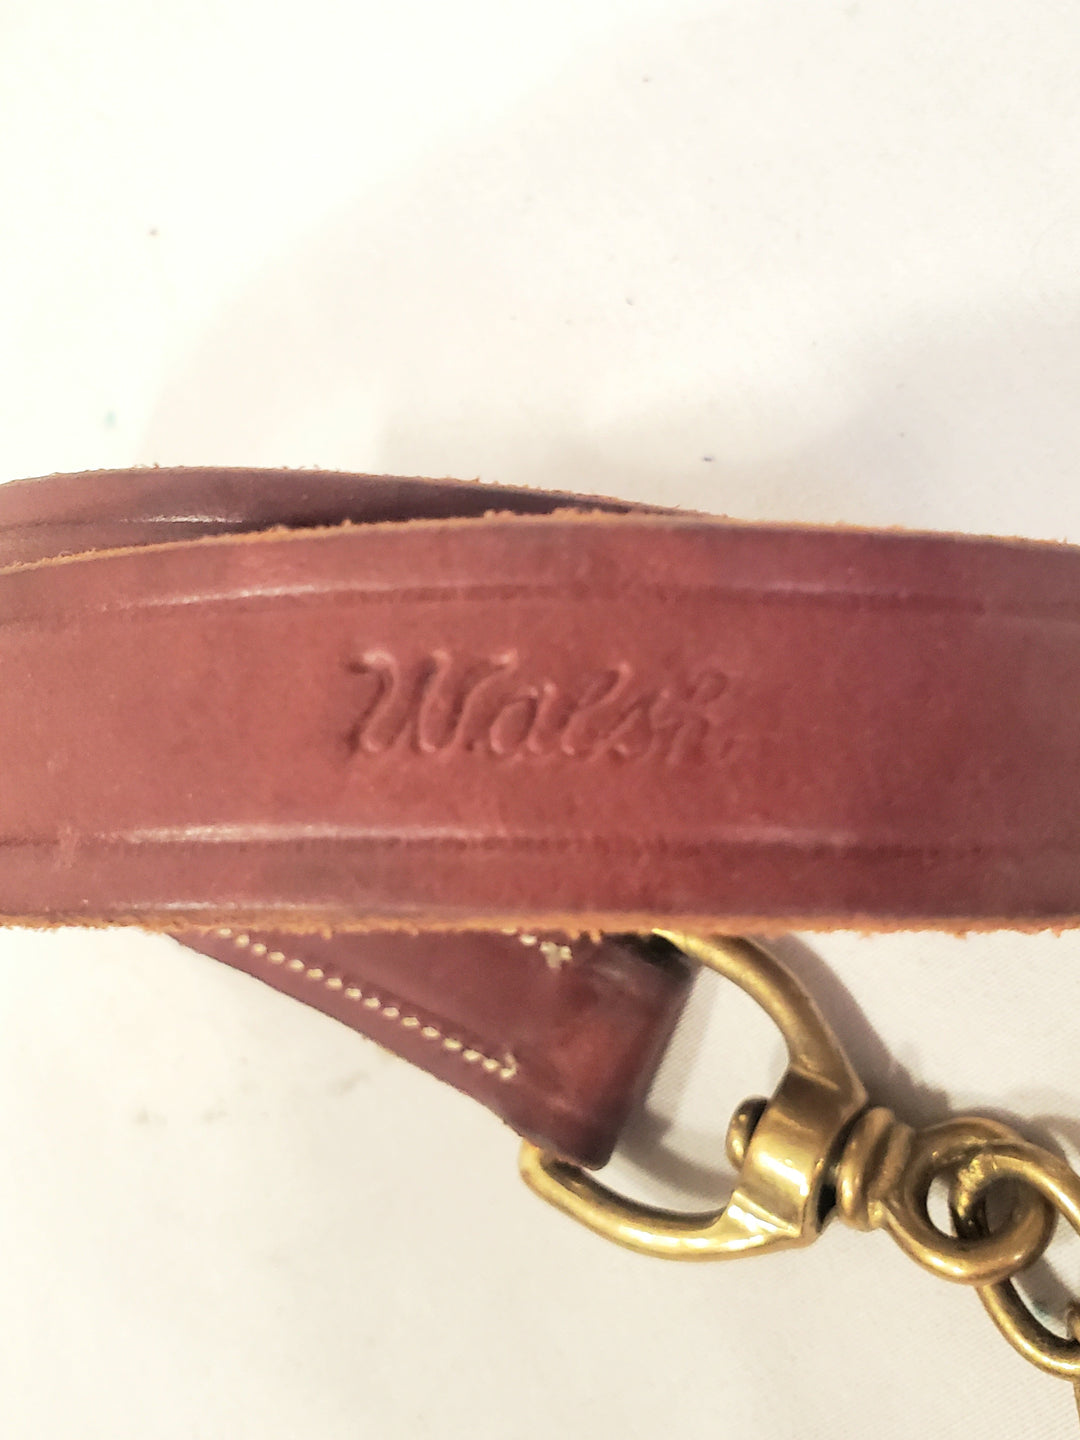 Walsh Leather Lead with Chain - New!